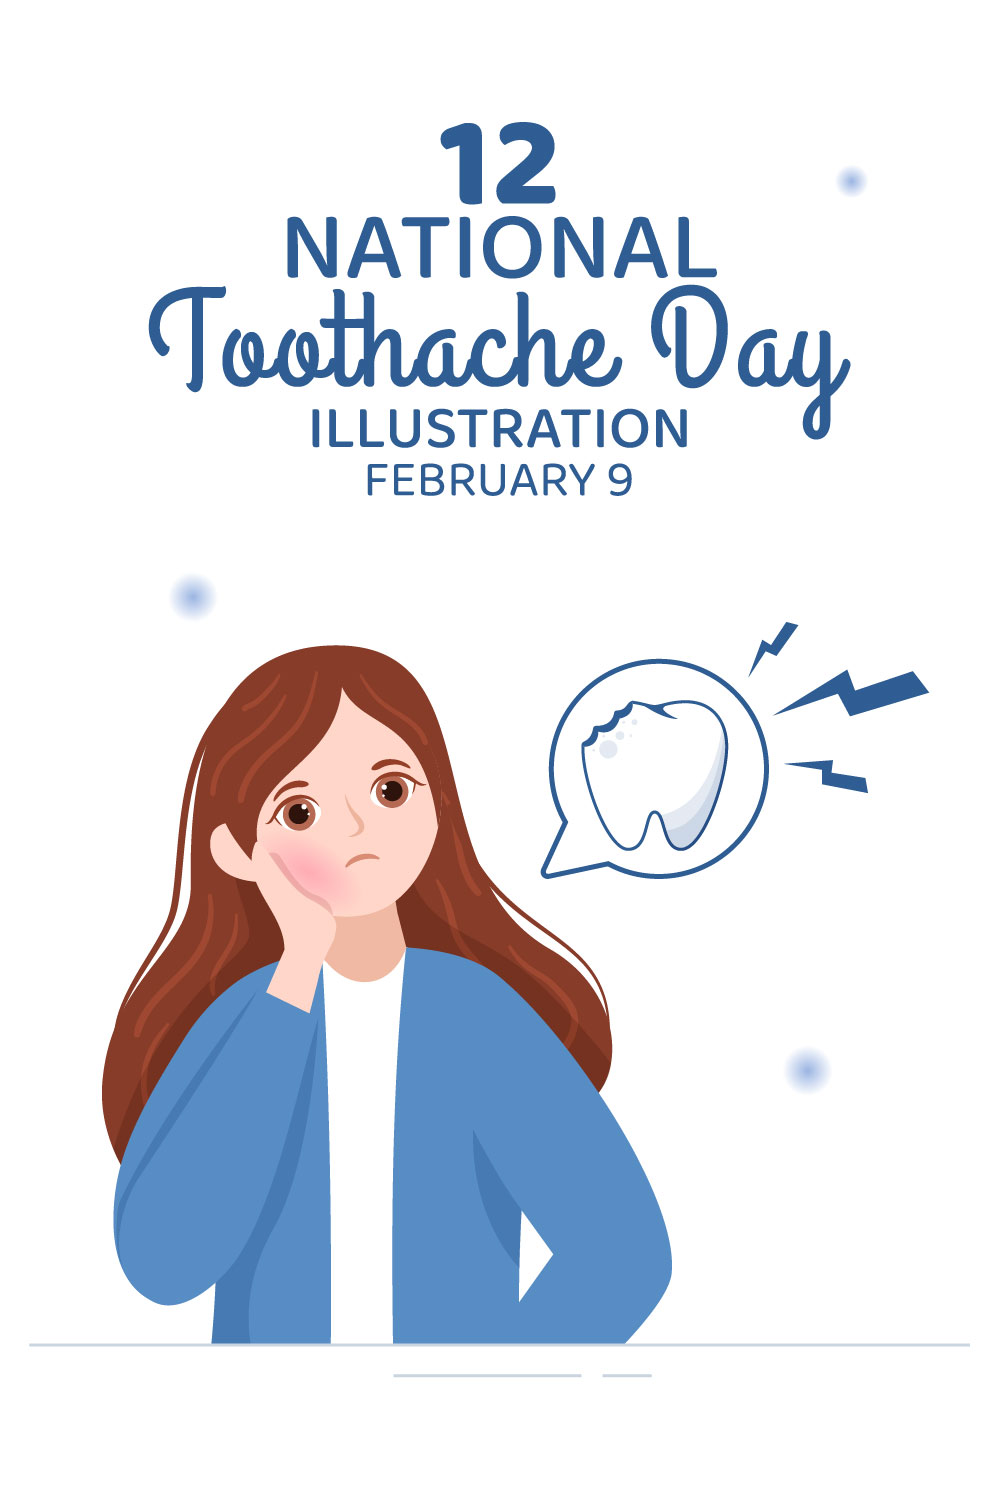 National Toothache Day Illustration pinterest image.